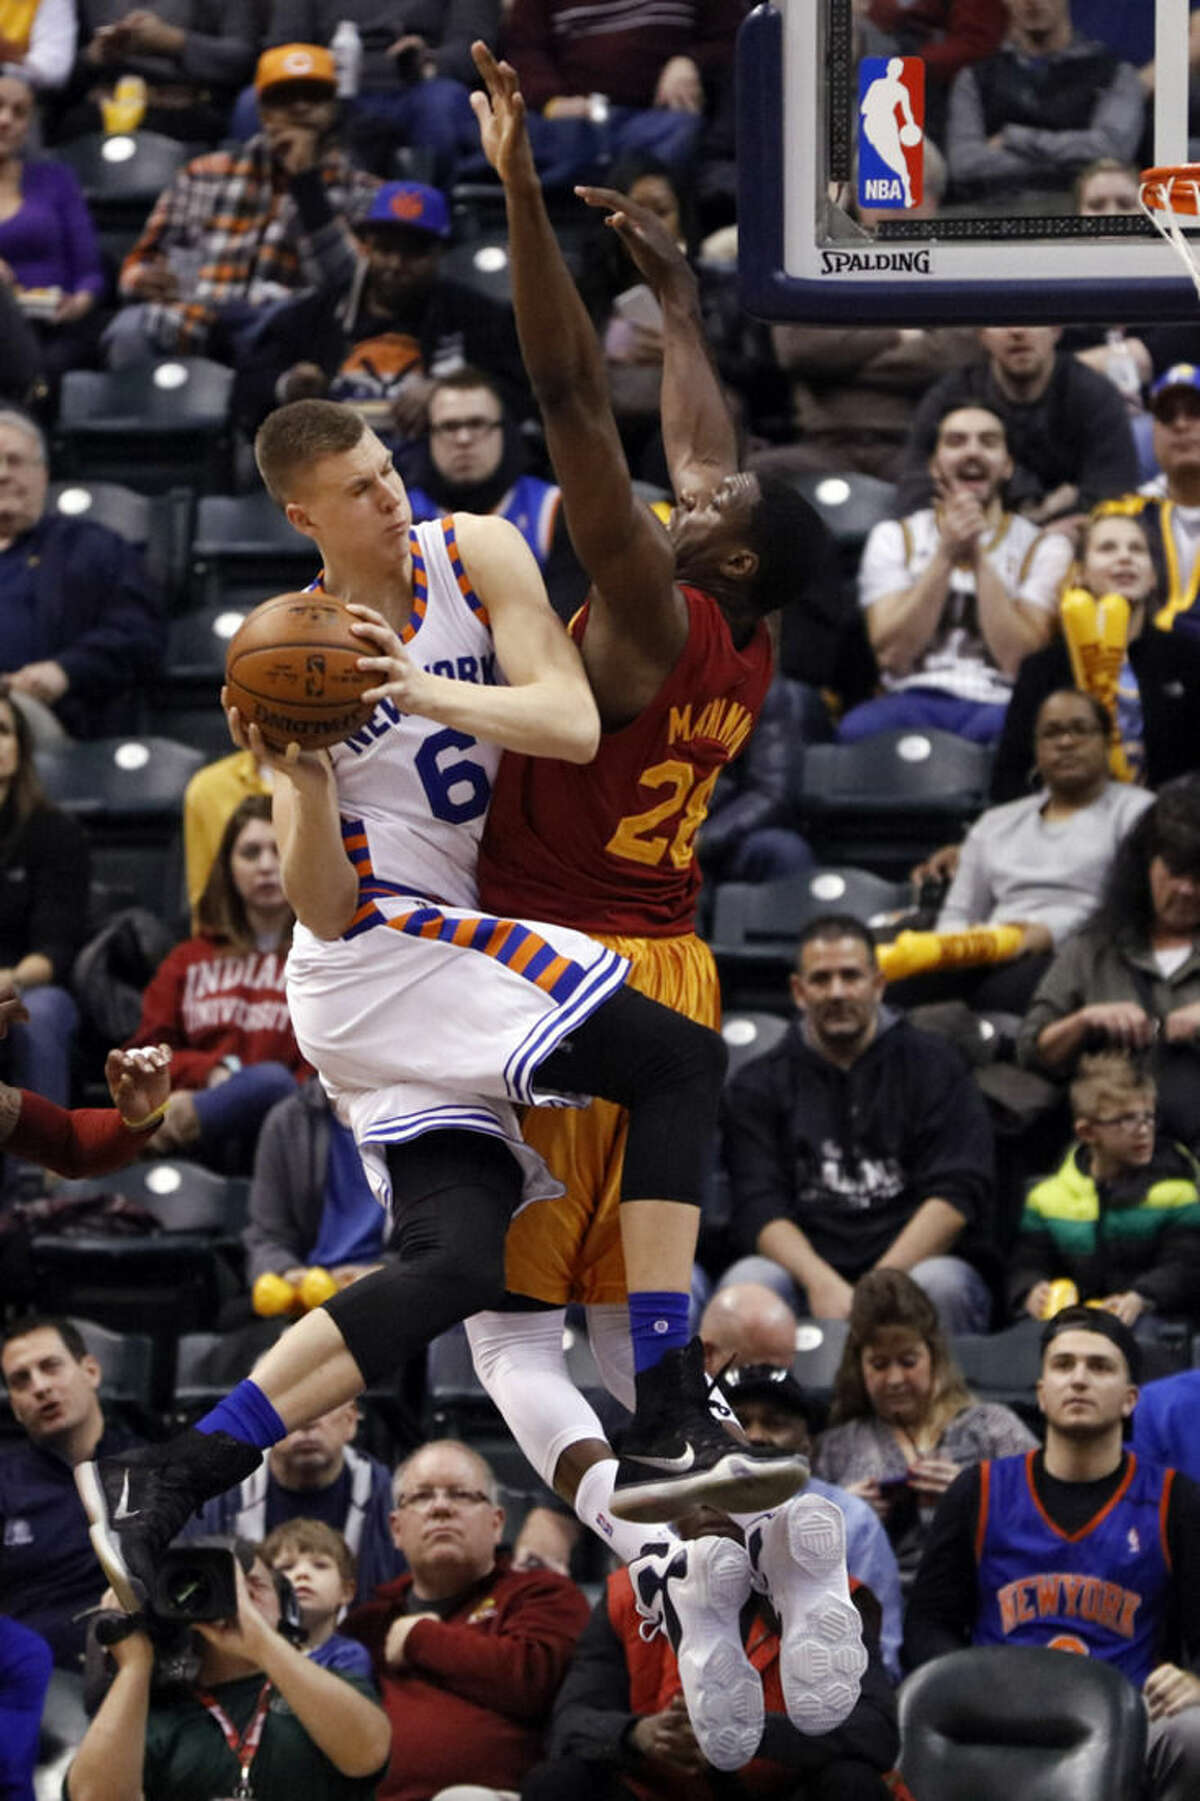 New York Knicks forward Kristaps Porzingis, left, passes around Indiana Pacers center Ian Mahinmi during the second half of an NBA basketball game in Indianapolis, Wednesday, Feb. 24, 2016. The Pacers won 108-105. (AP Photo/AJ Mast)